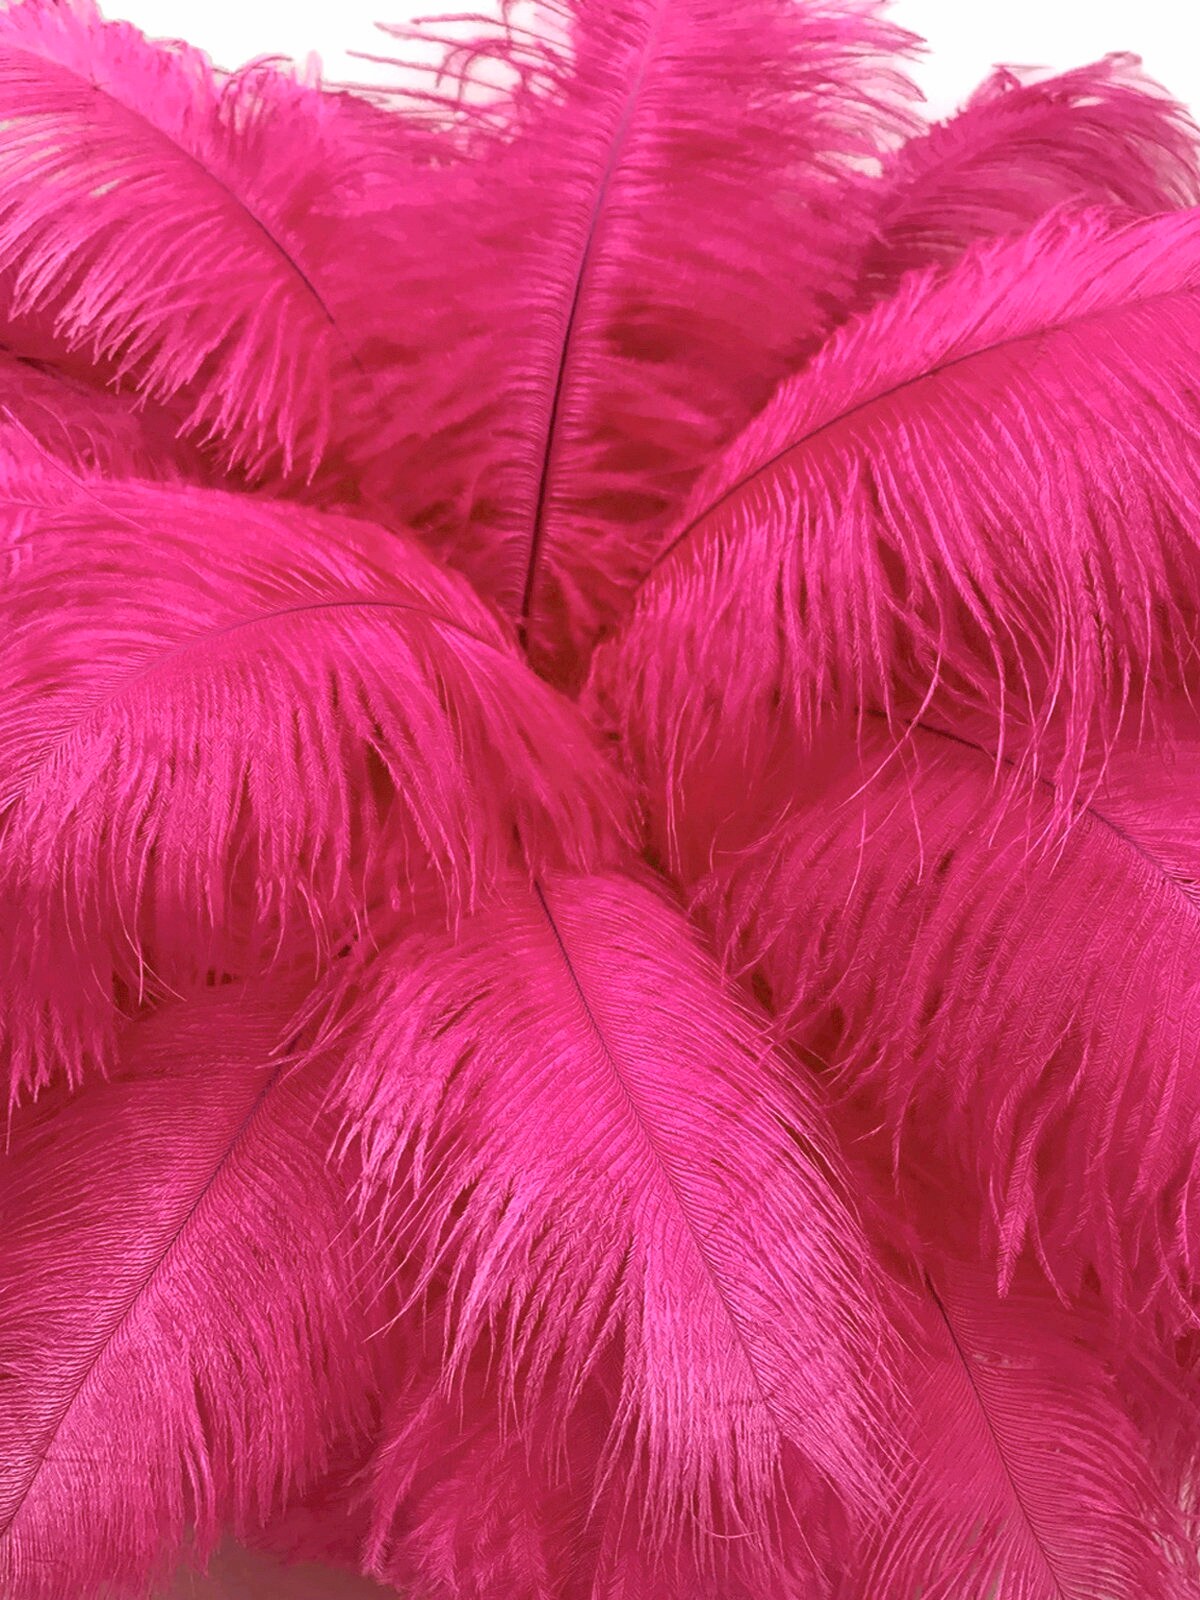 Ostrich Feathers - Plumes - Dusty Rose Drabs - 10 Pcs. - (8-10 x 3-5 W)